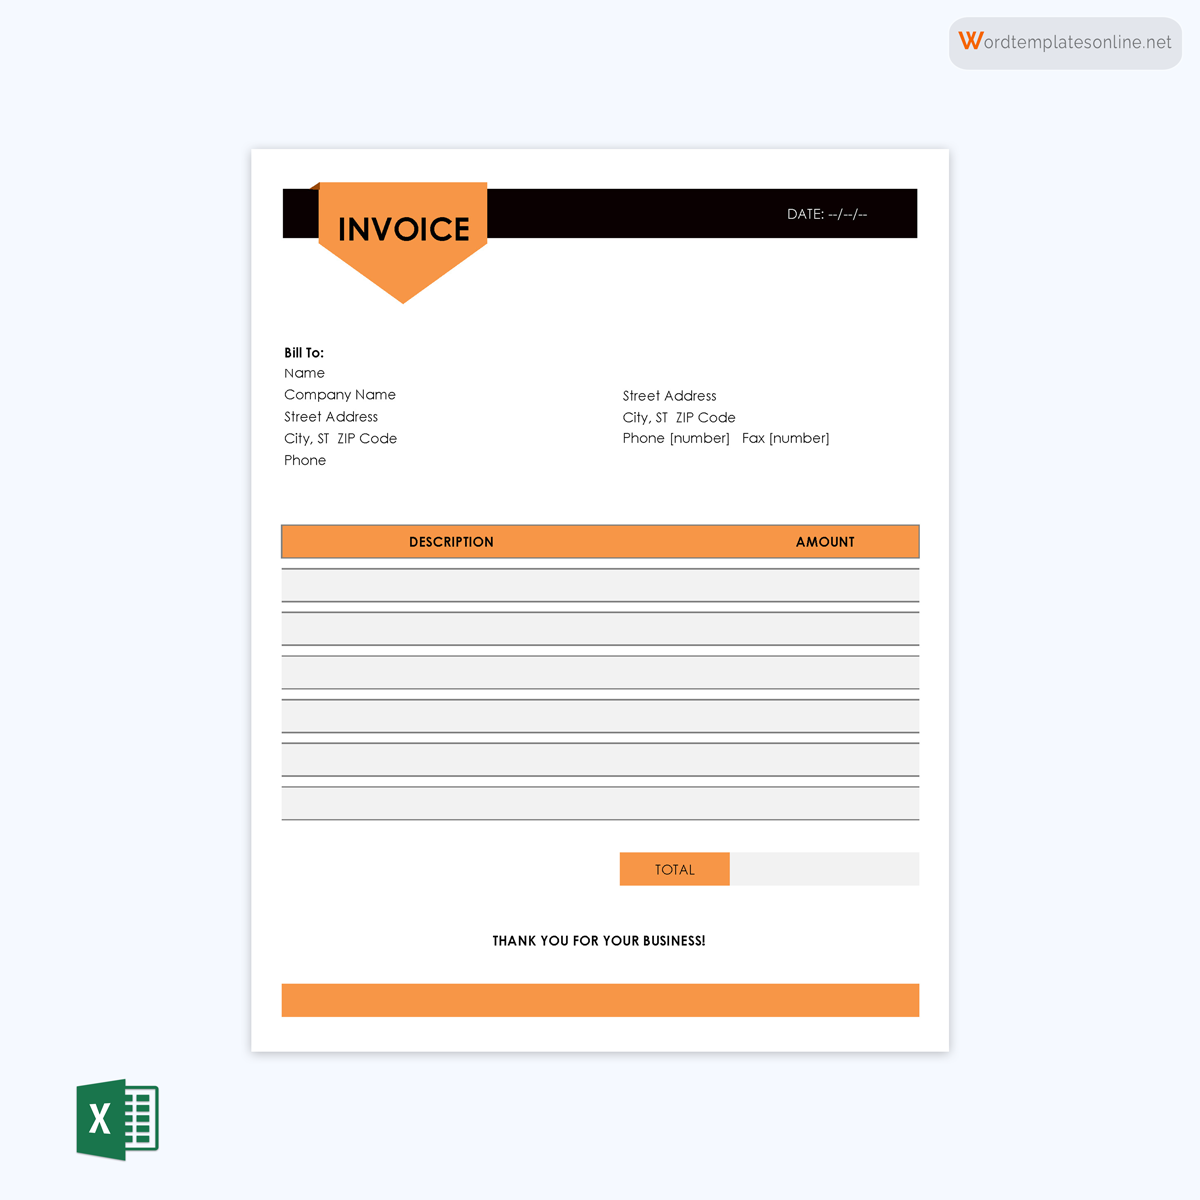 Free invoice form sample with printable design